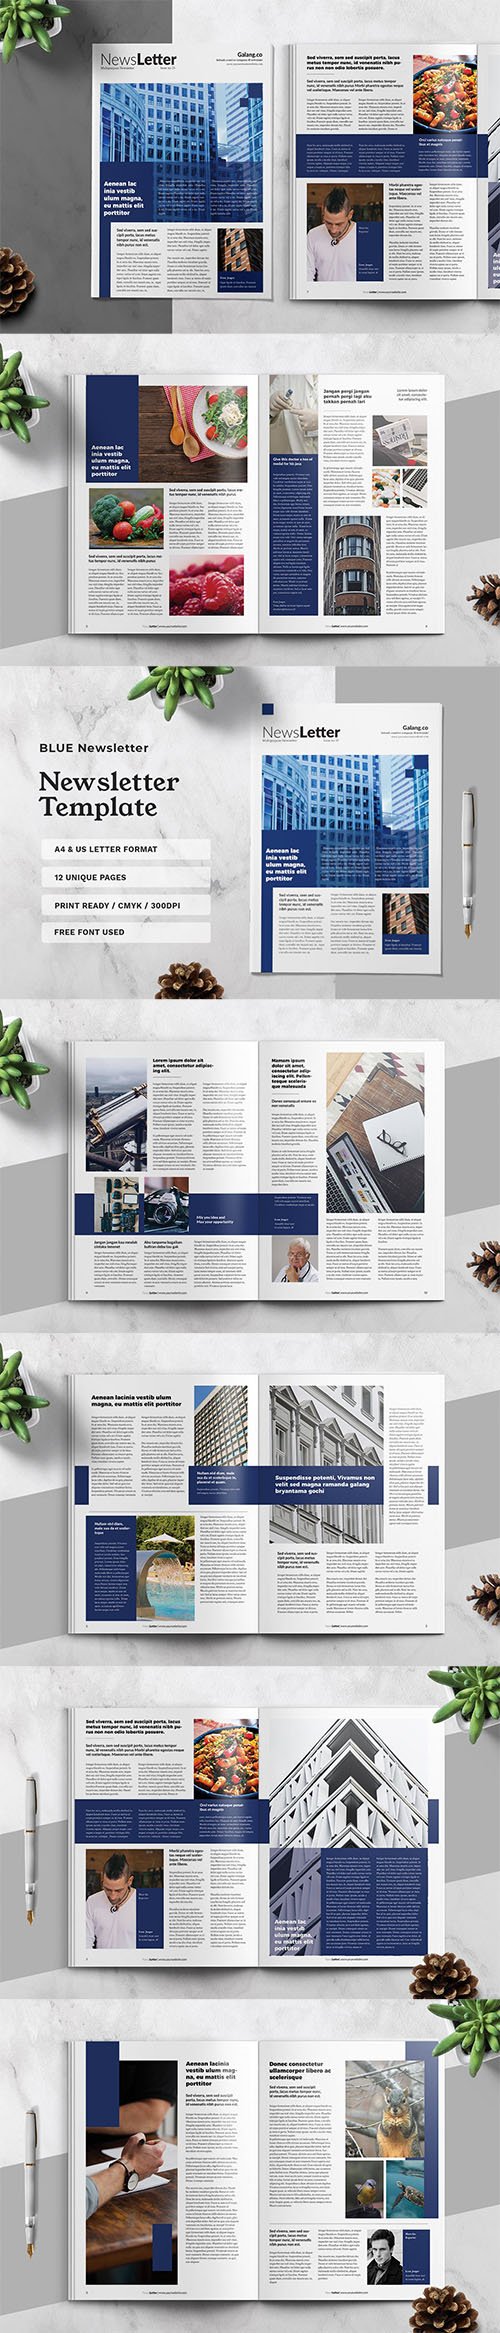 Corporate Business Newsletter Template